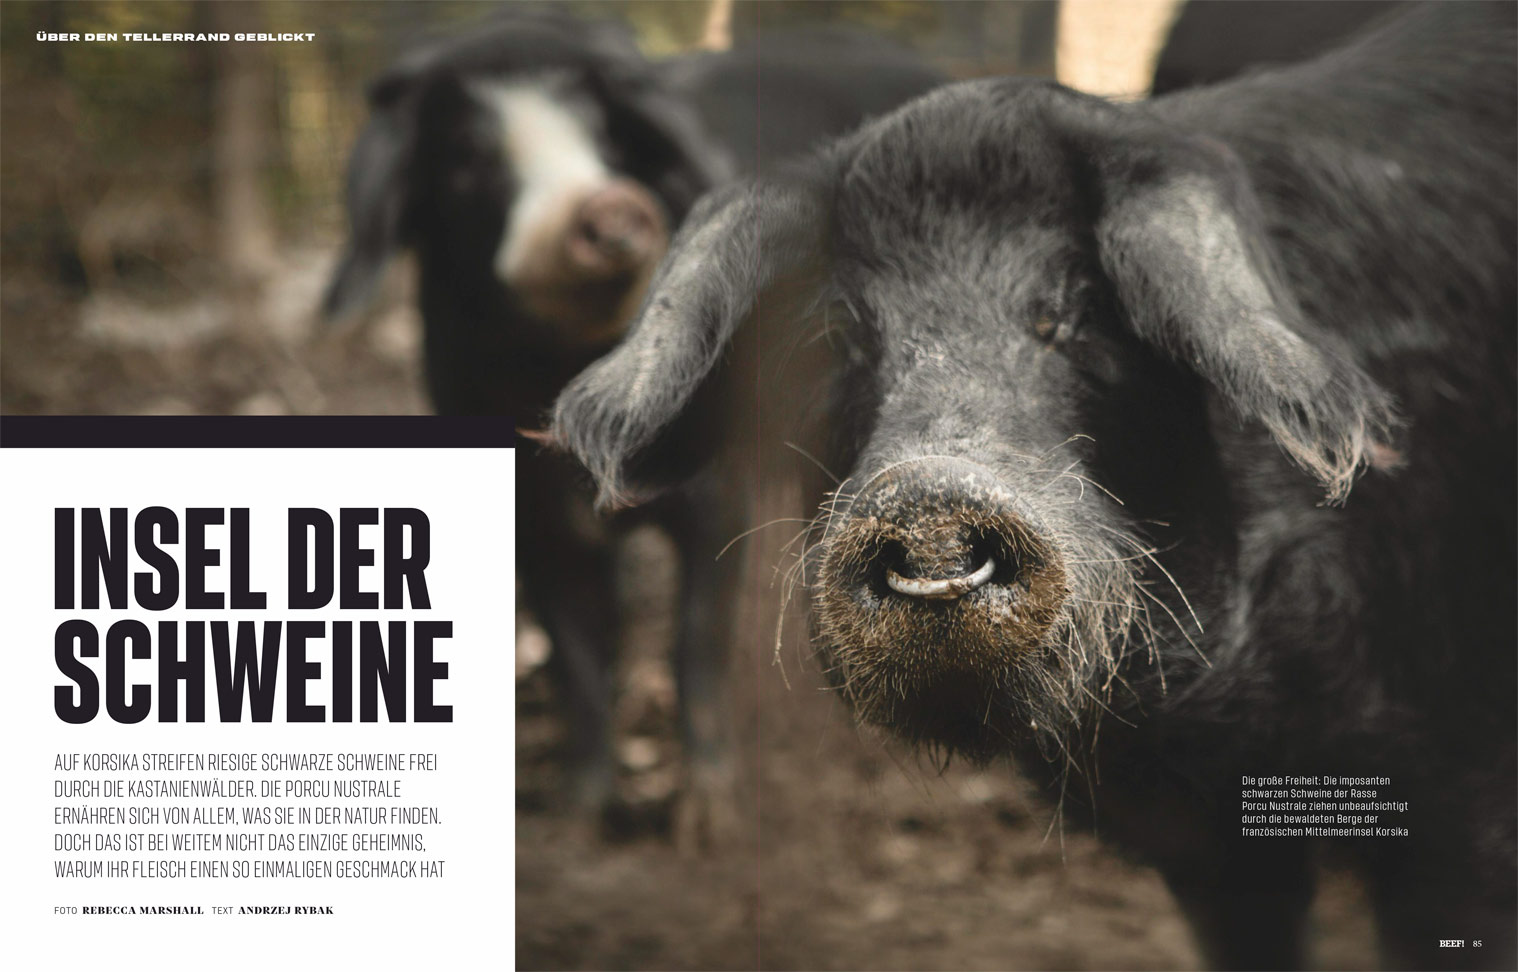 Double-page spread inside BEEF! magazine, showing a full-bleed photo of a black pig